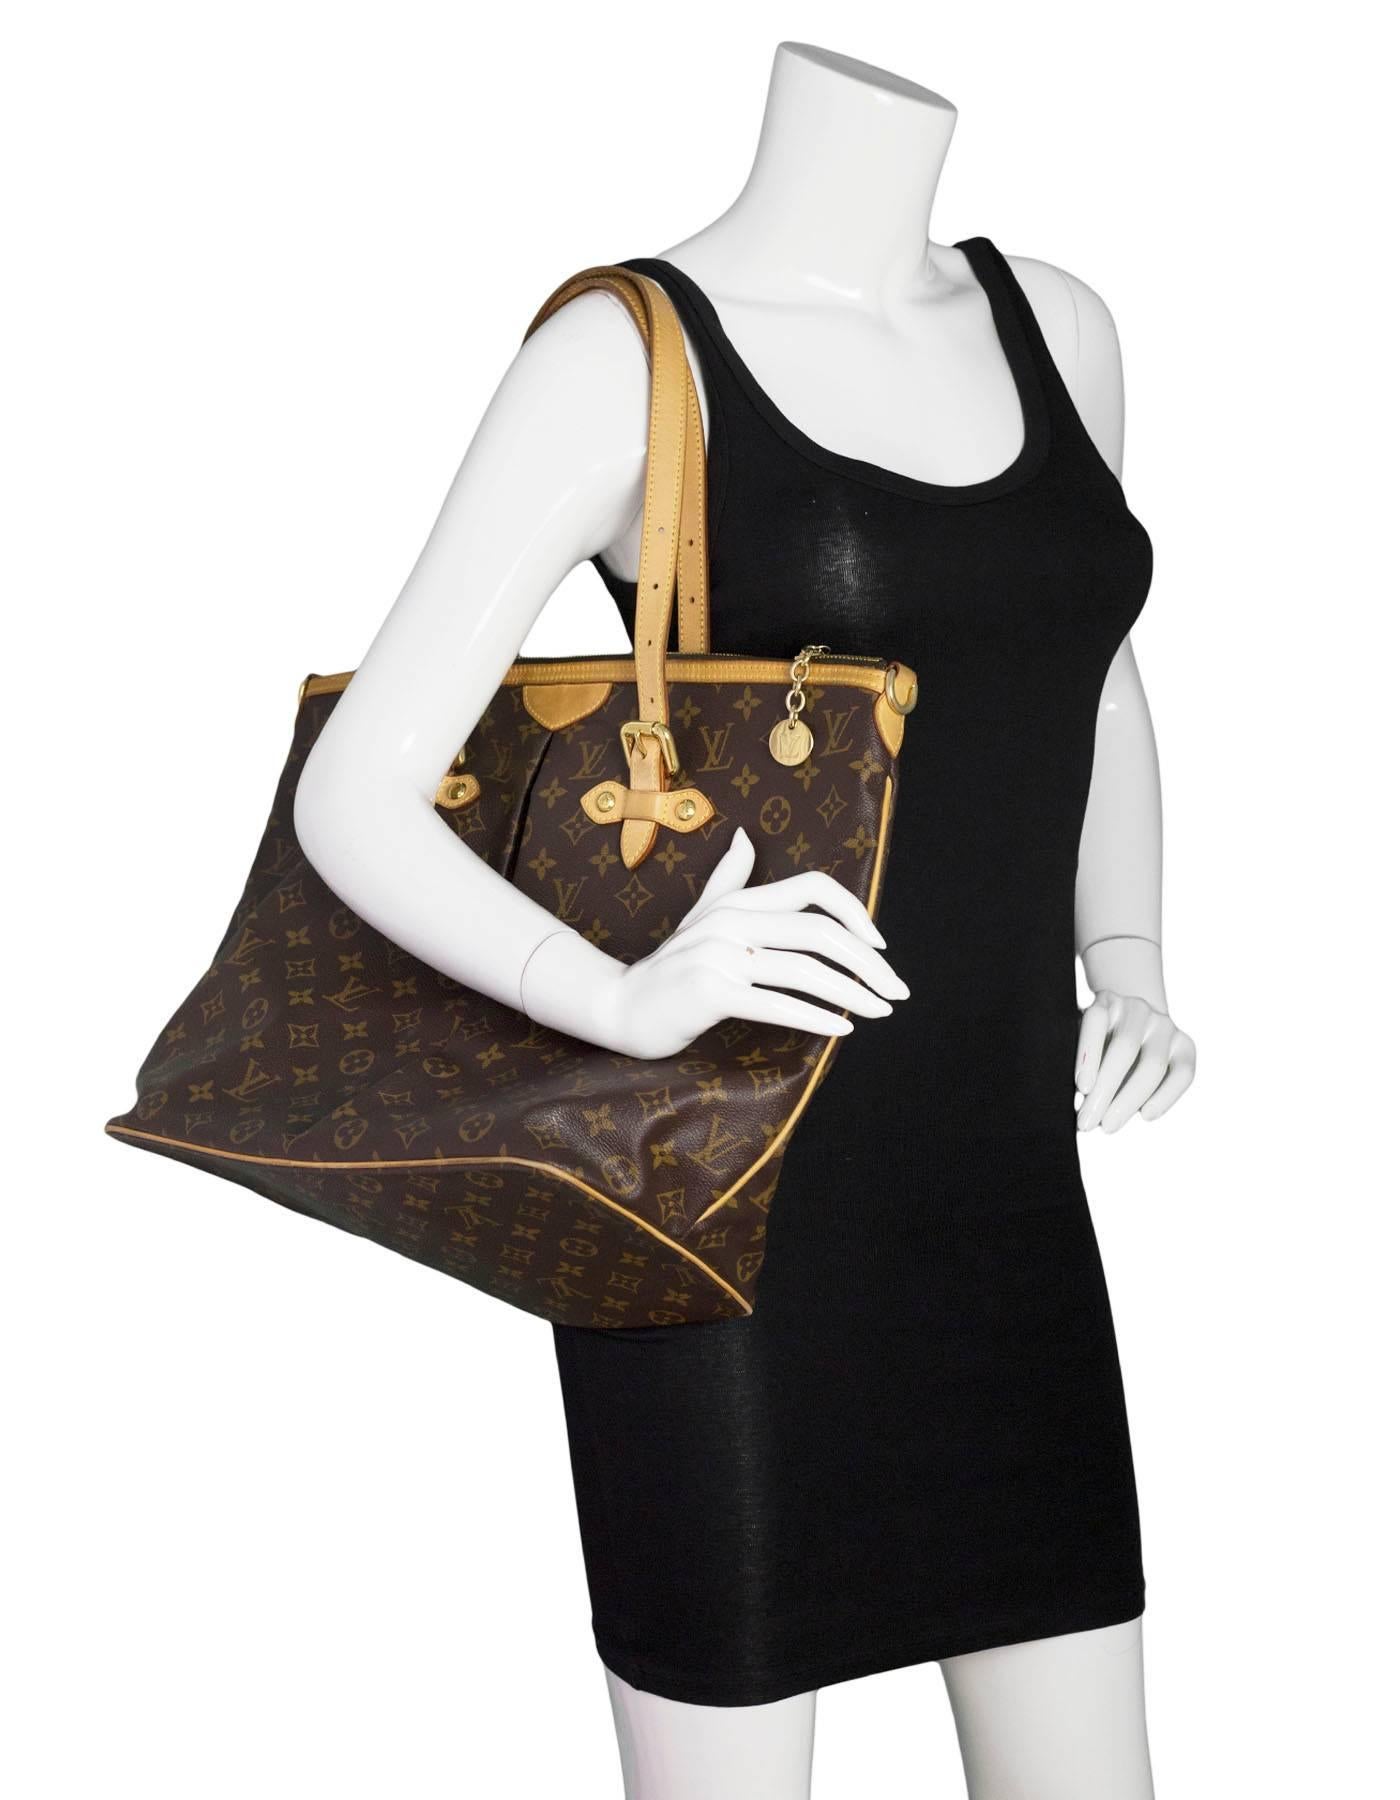 Louis Vuitton Monogram Palermo GM Tote

Made In: USA
Year of Production: 2007
Color: Brown, tan
Hardware: Goldtone
Materials: Vachetta leather and coated canvas
Lining: Brown canvas
Closure/Opening: Zip top
Exterior Pockets: None
Interior Pockets: